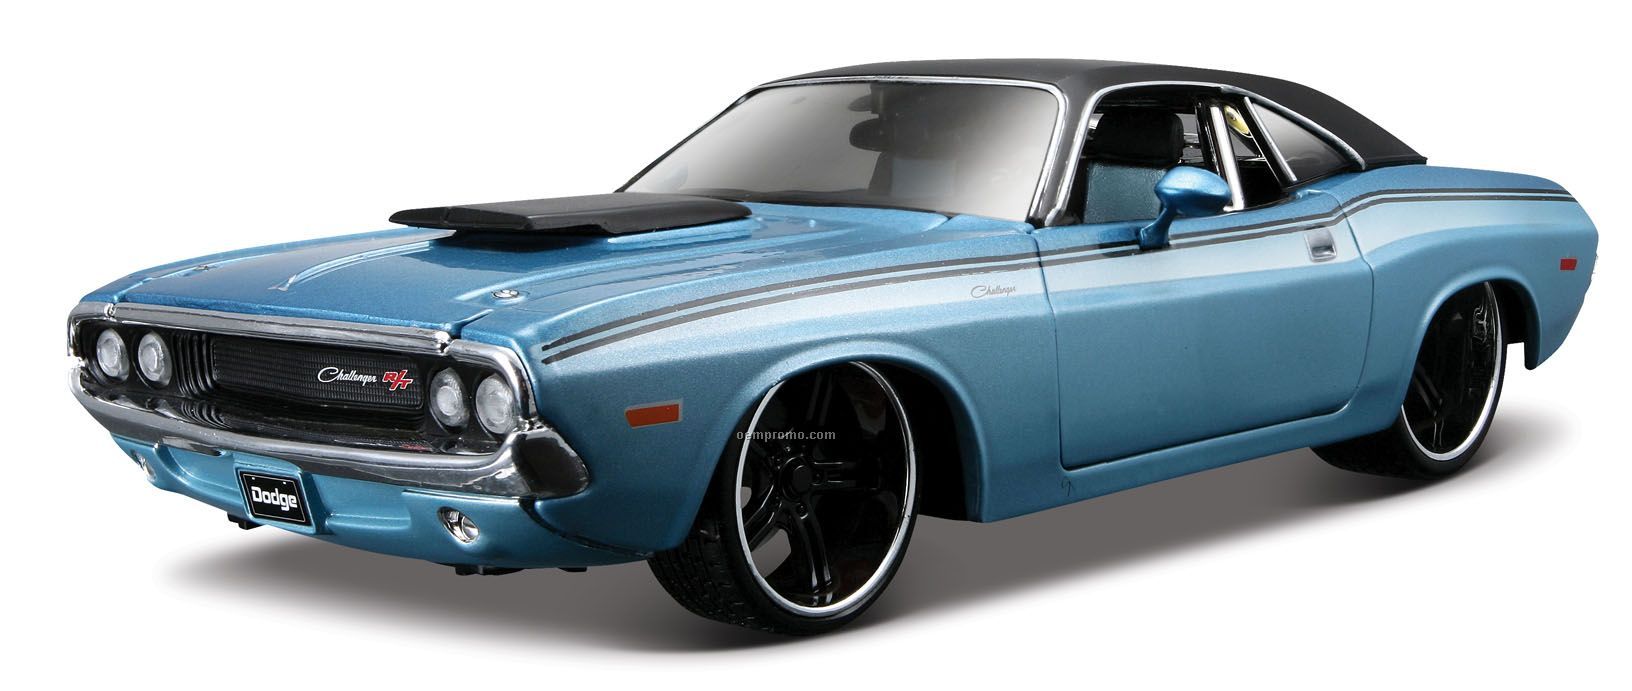 7"X2-1/2"X3"1970 Dodge Challenger R/T Coupe All Star Die Cast Replica